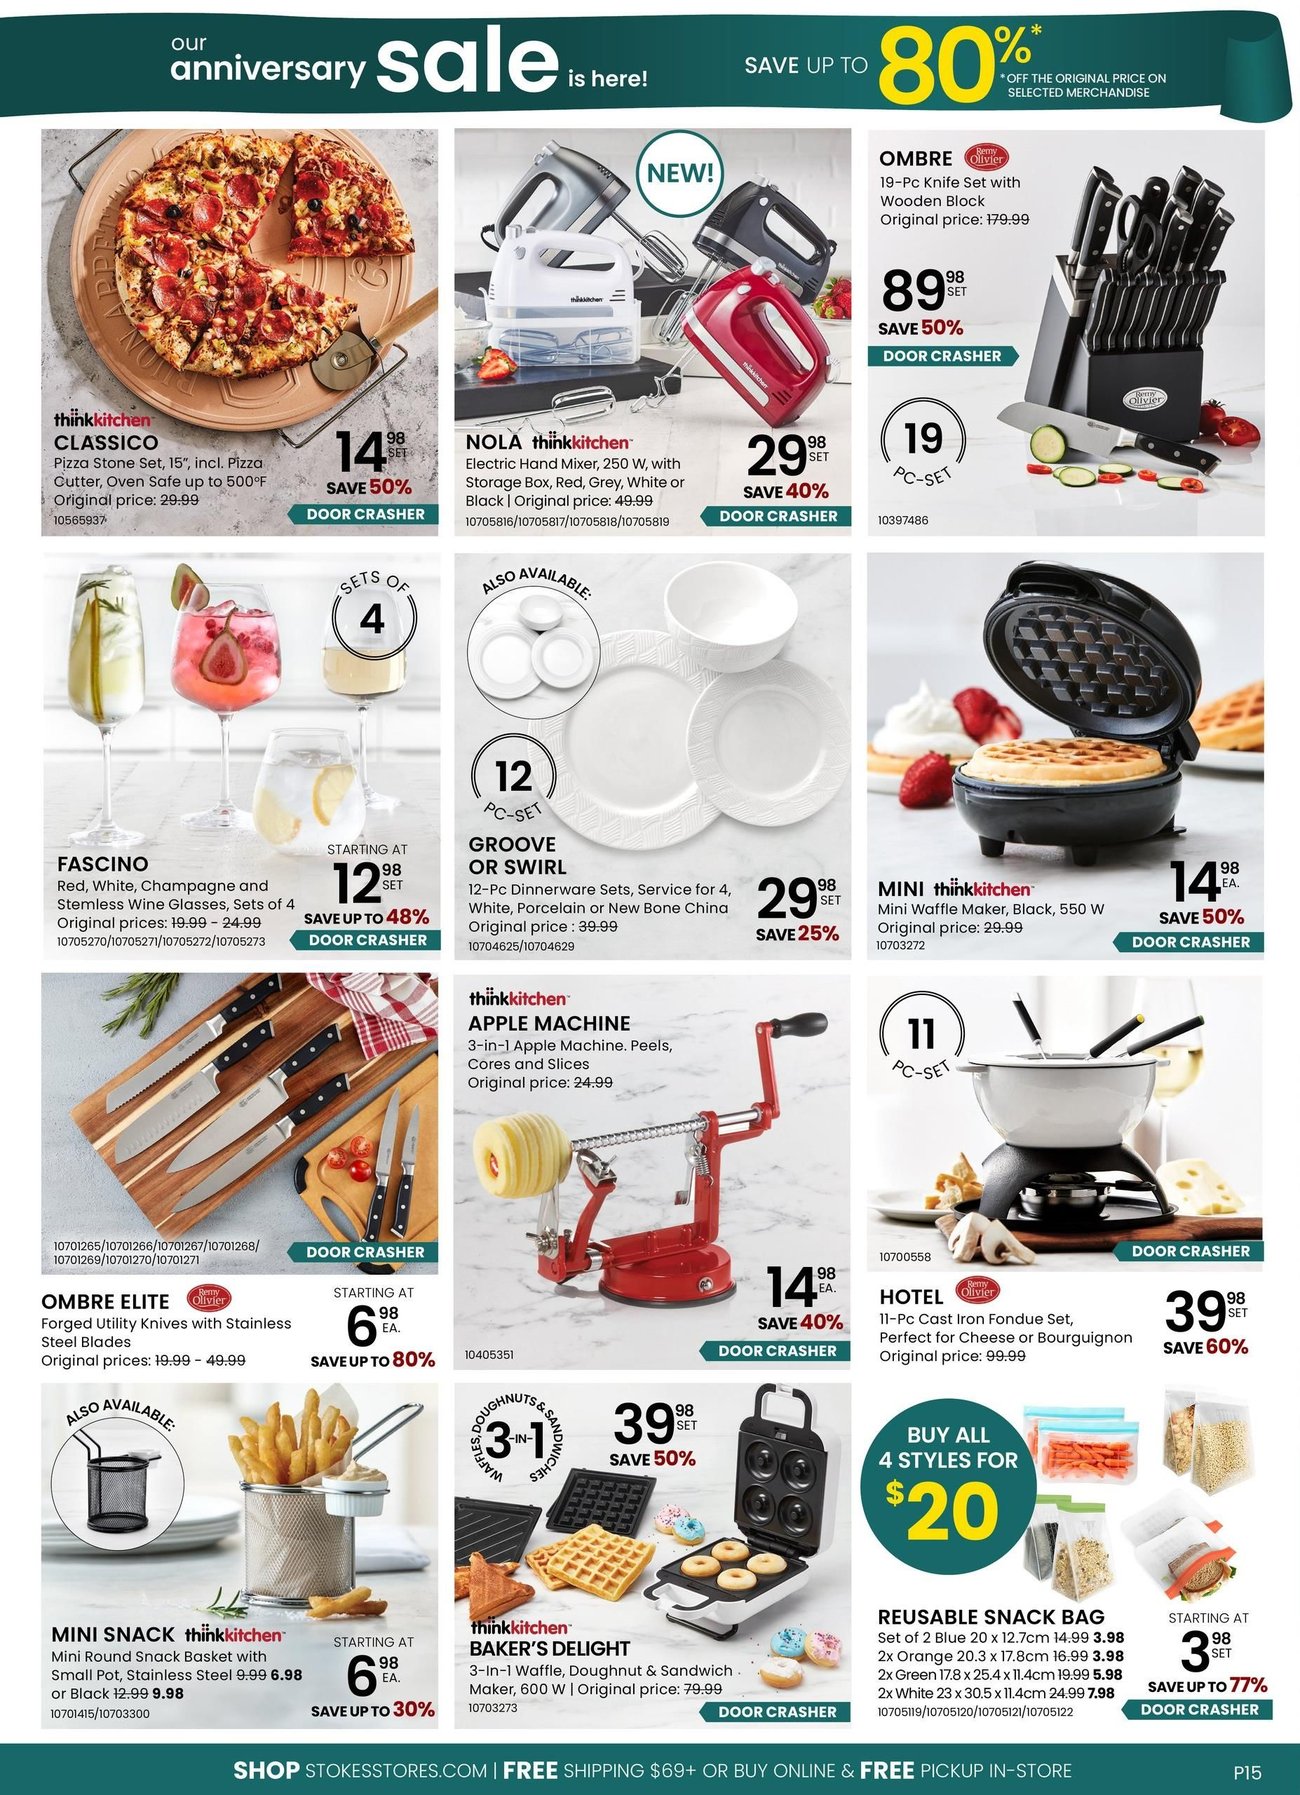 Stokes - Monthly Specials - Page 7